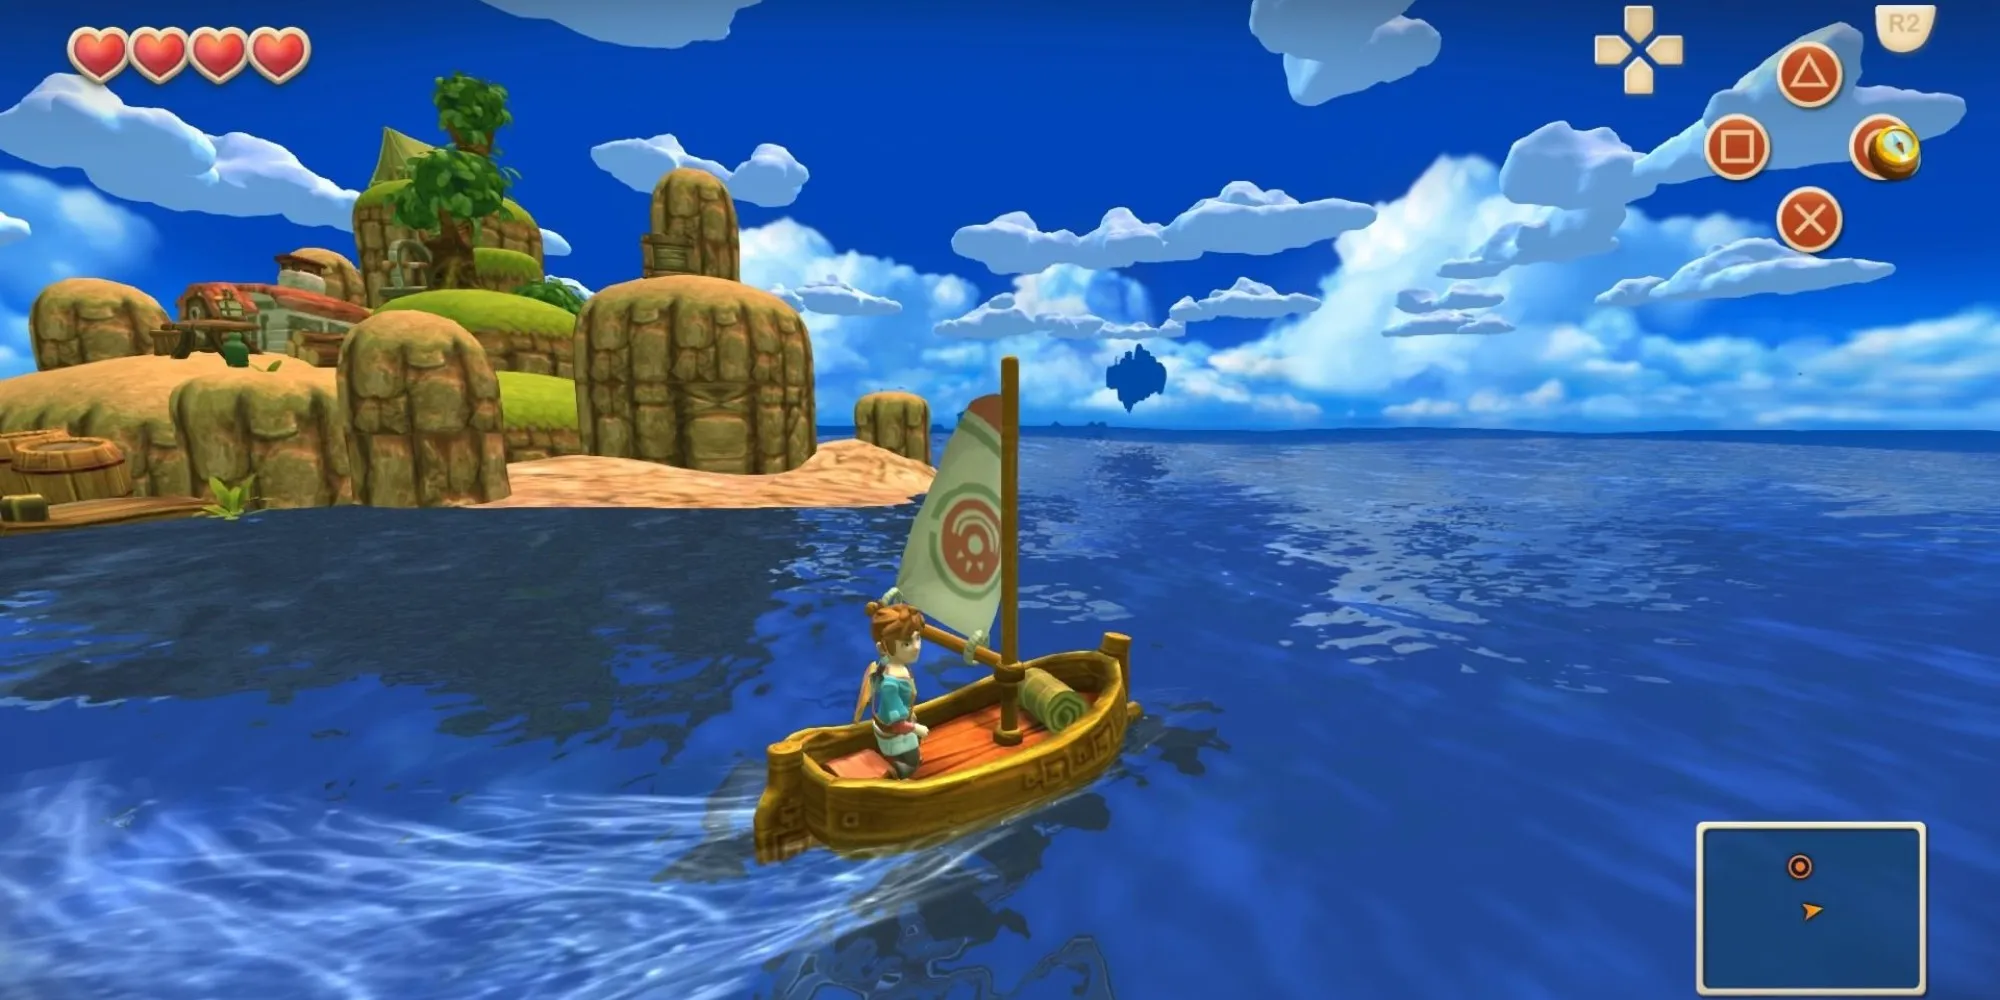 Protagonist sailing on a small boat in Oceanhorn seas near a small island